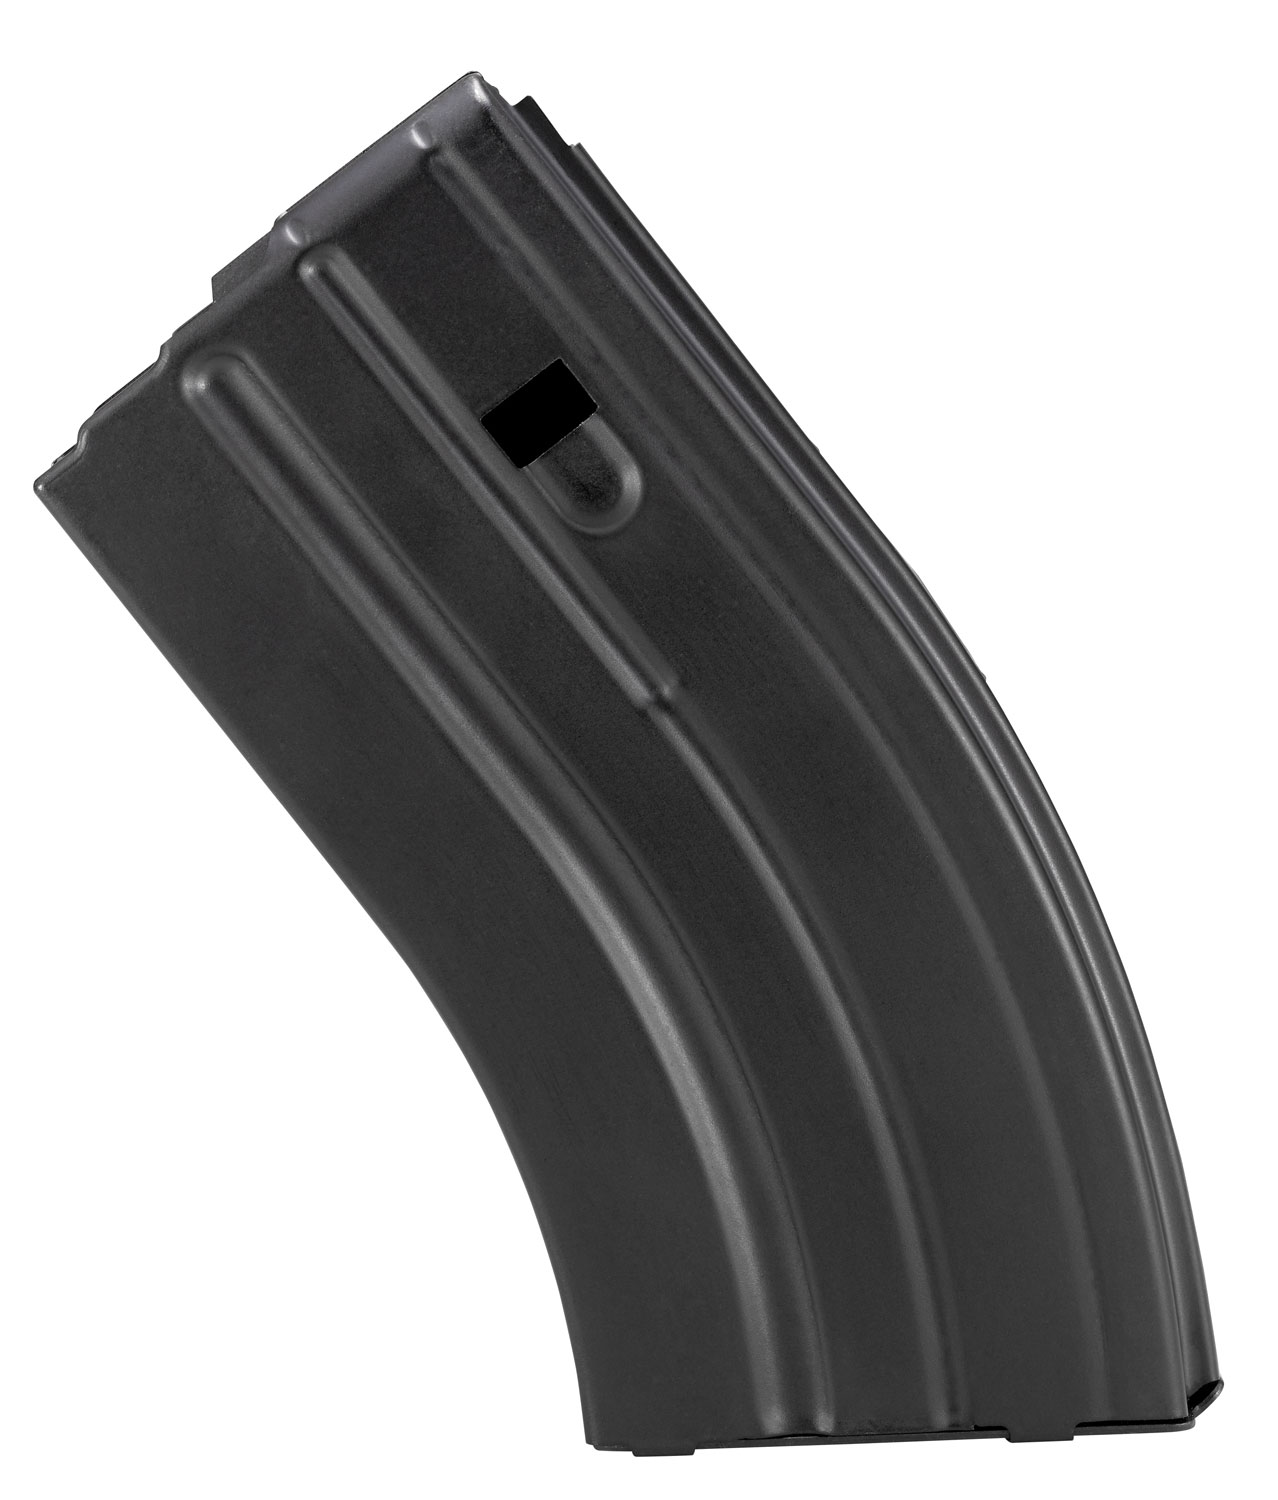 CPD MAGAZINE AR15 7.62X39 20RD BLACKENED STAINLESS STEEL